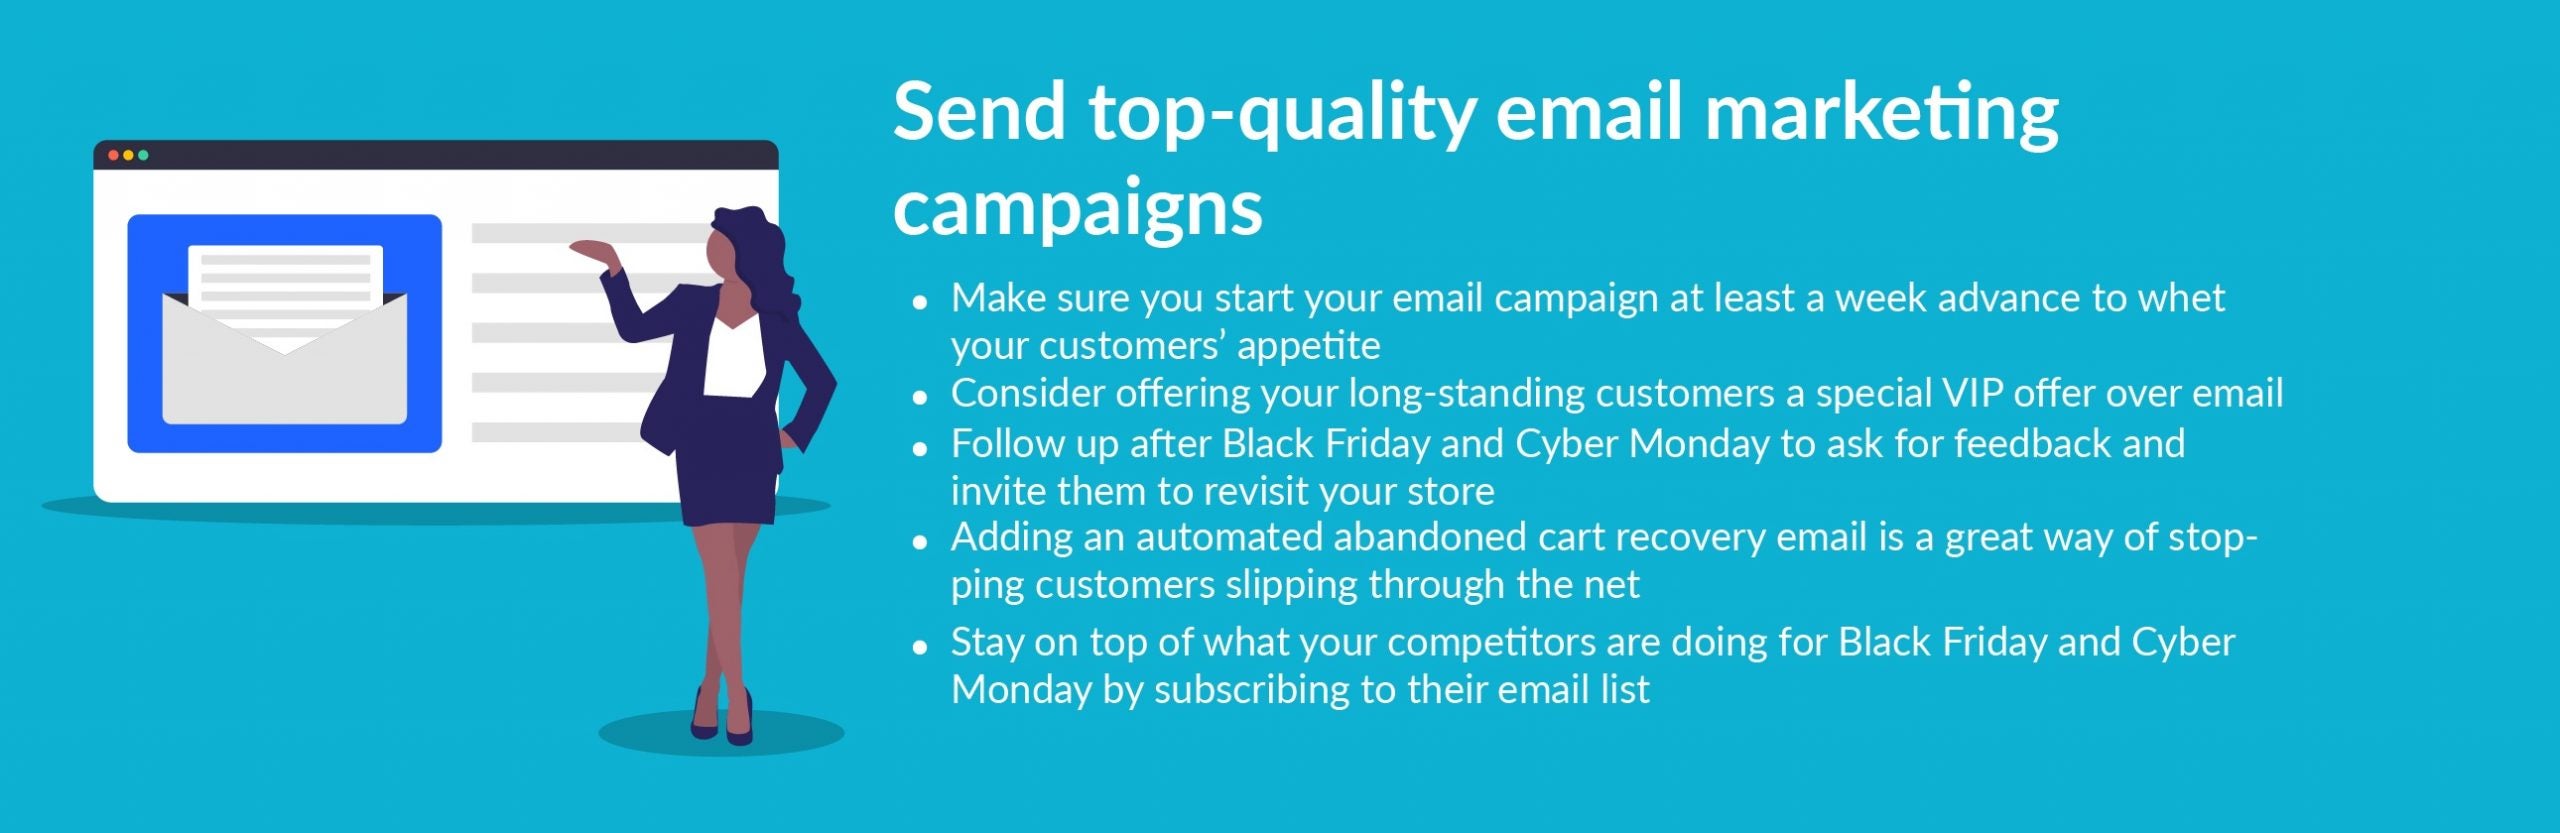 black friday tip send email campaigns